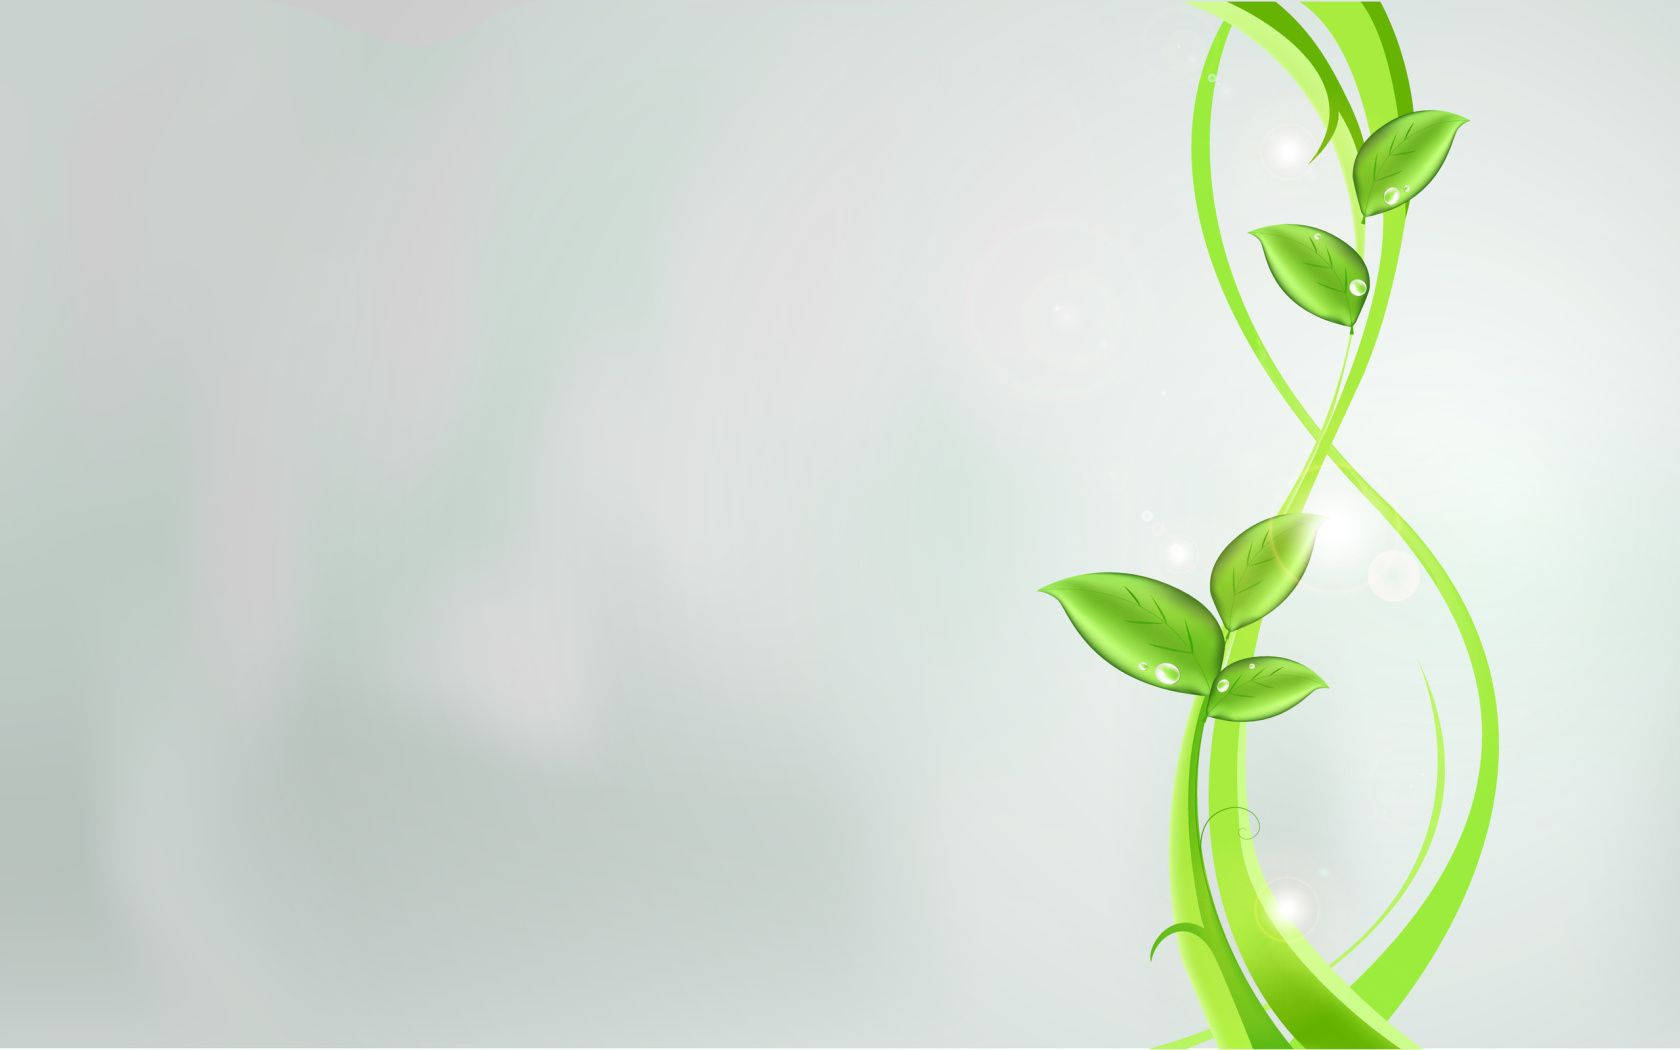 Abstract Eco Green Plant Background